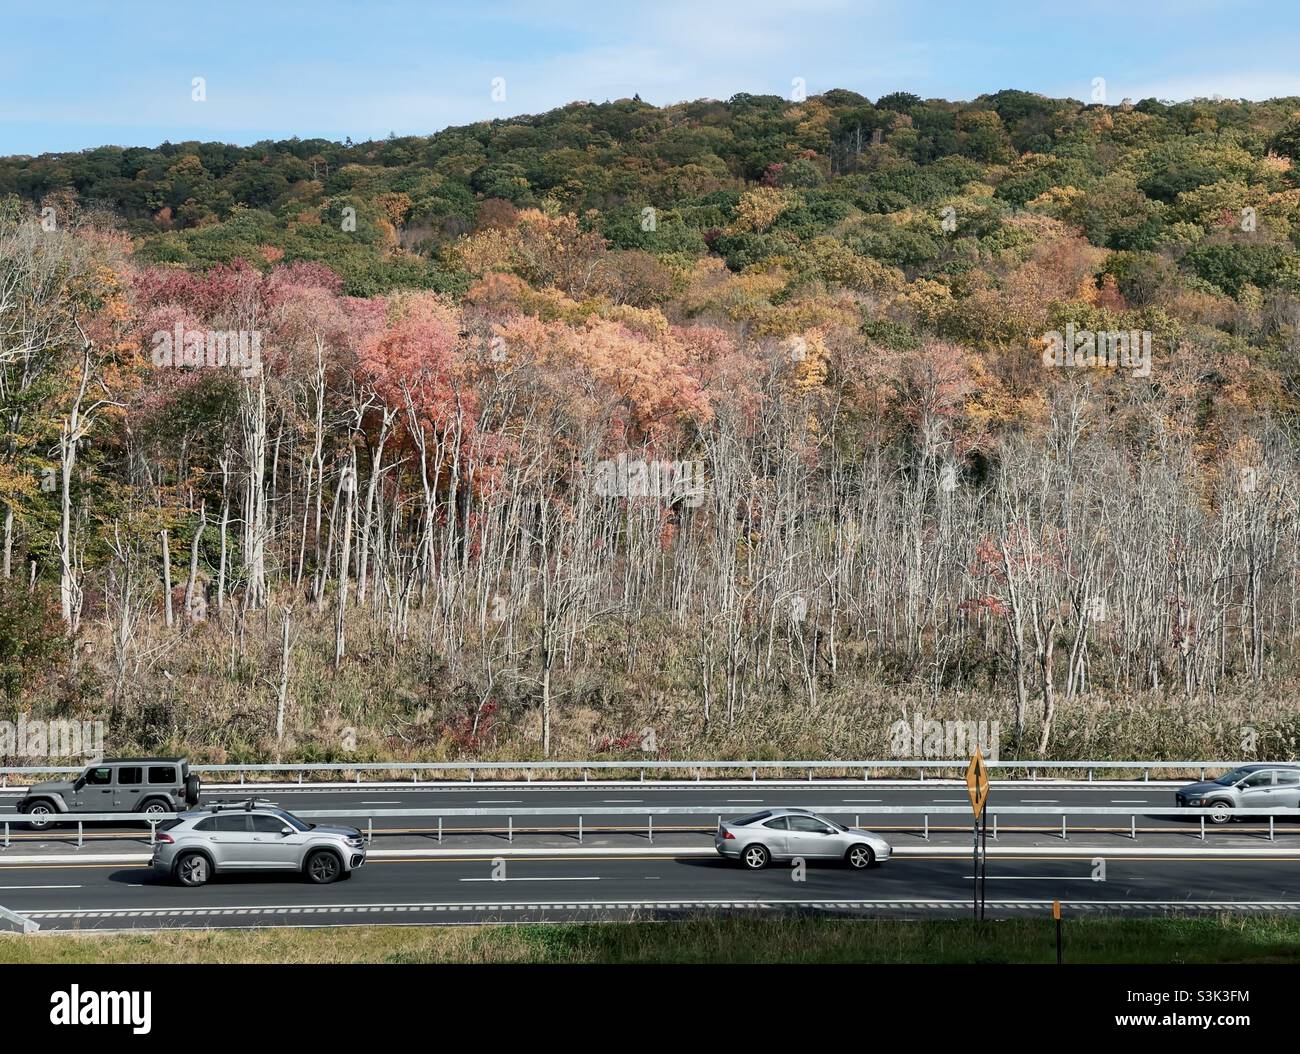 Taconic State Parkway in Putnam County, New York Stockfoto